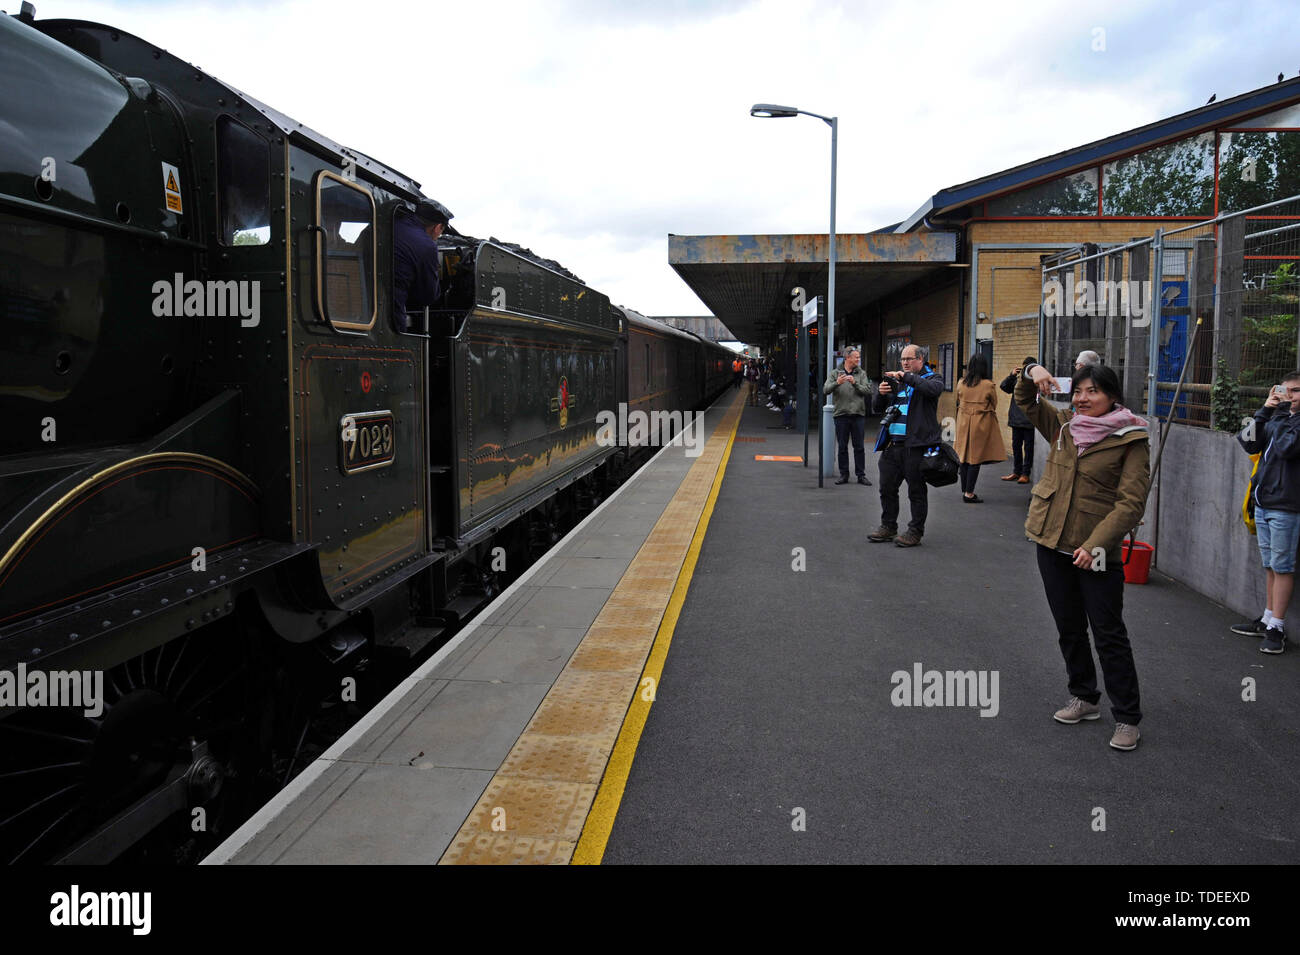 Oxford, UK. 15th June 2019. Rail enthusiasts photograph ex Great Western Railway locomotive 7029 Clun Castle as she arrives at Oxford station on a steam railtour. The railtour is part of the 175 anniversary celebrations for the opening of the Oxford to Didcot Railway. G.P.Essex/Alamy Live News Stock Photo